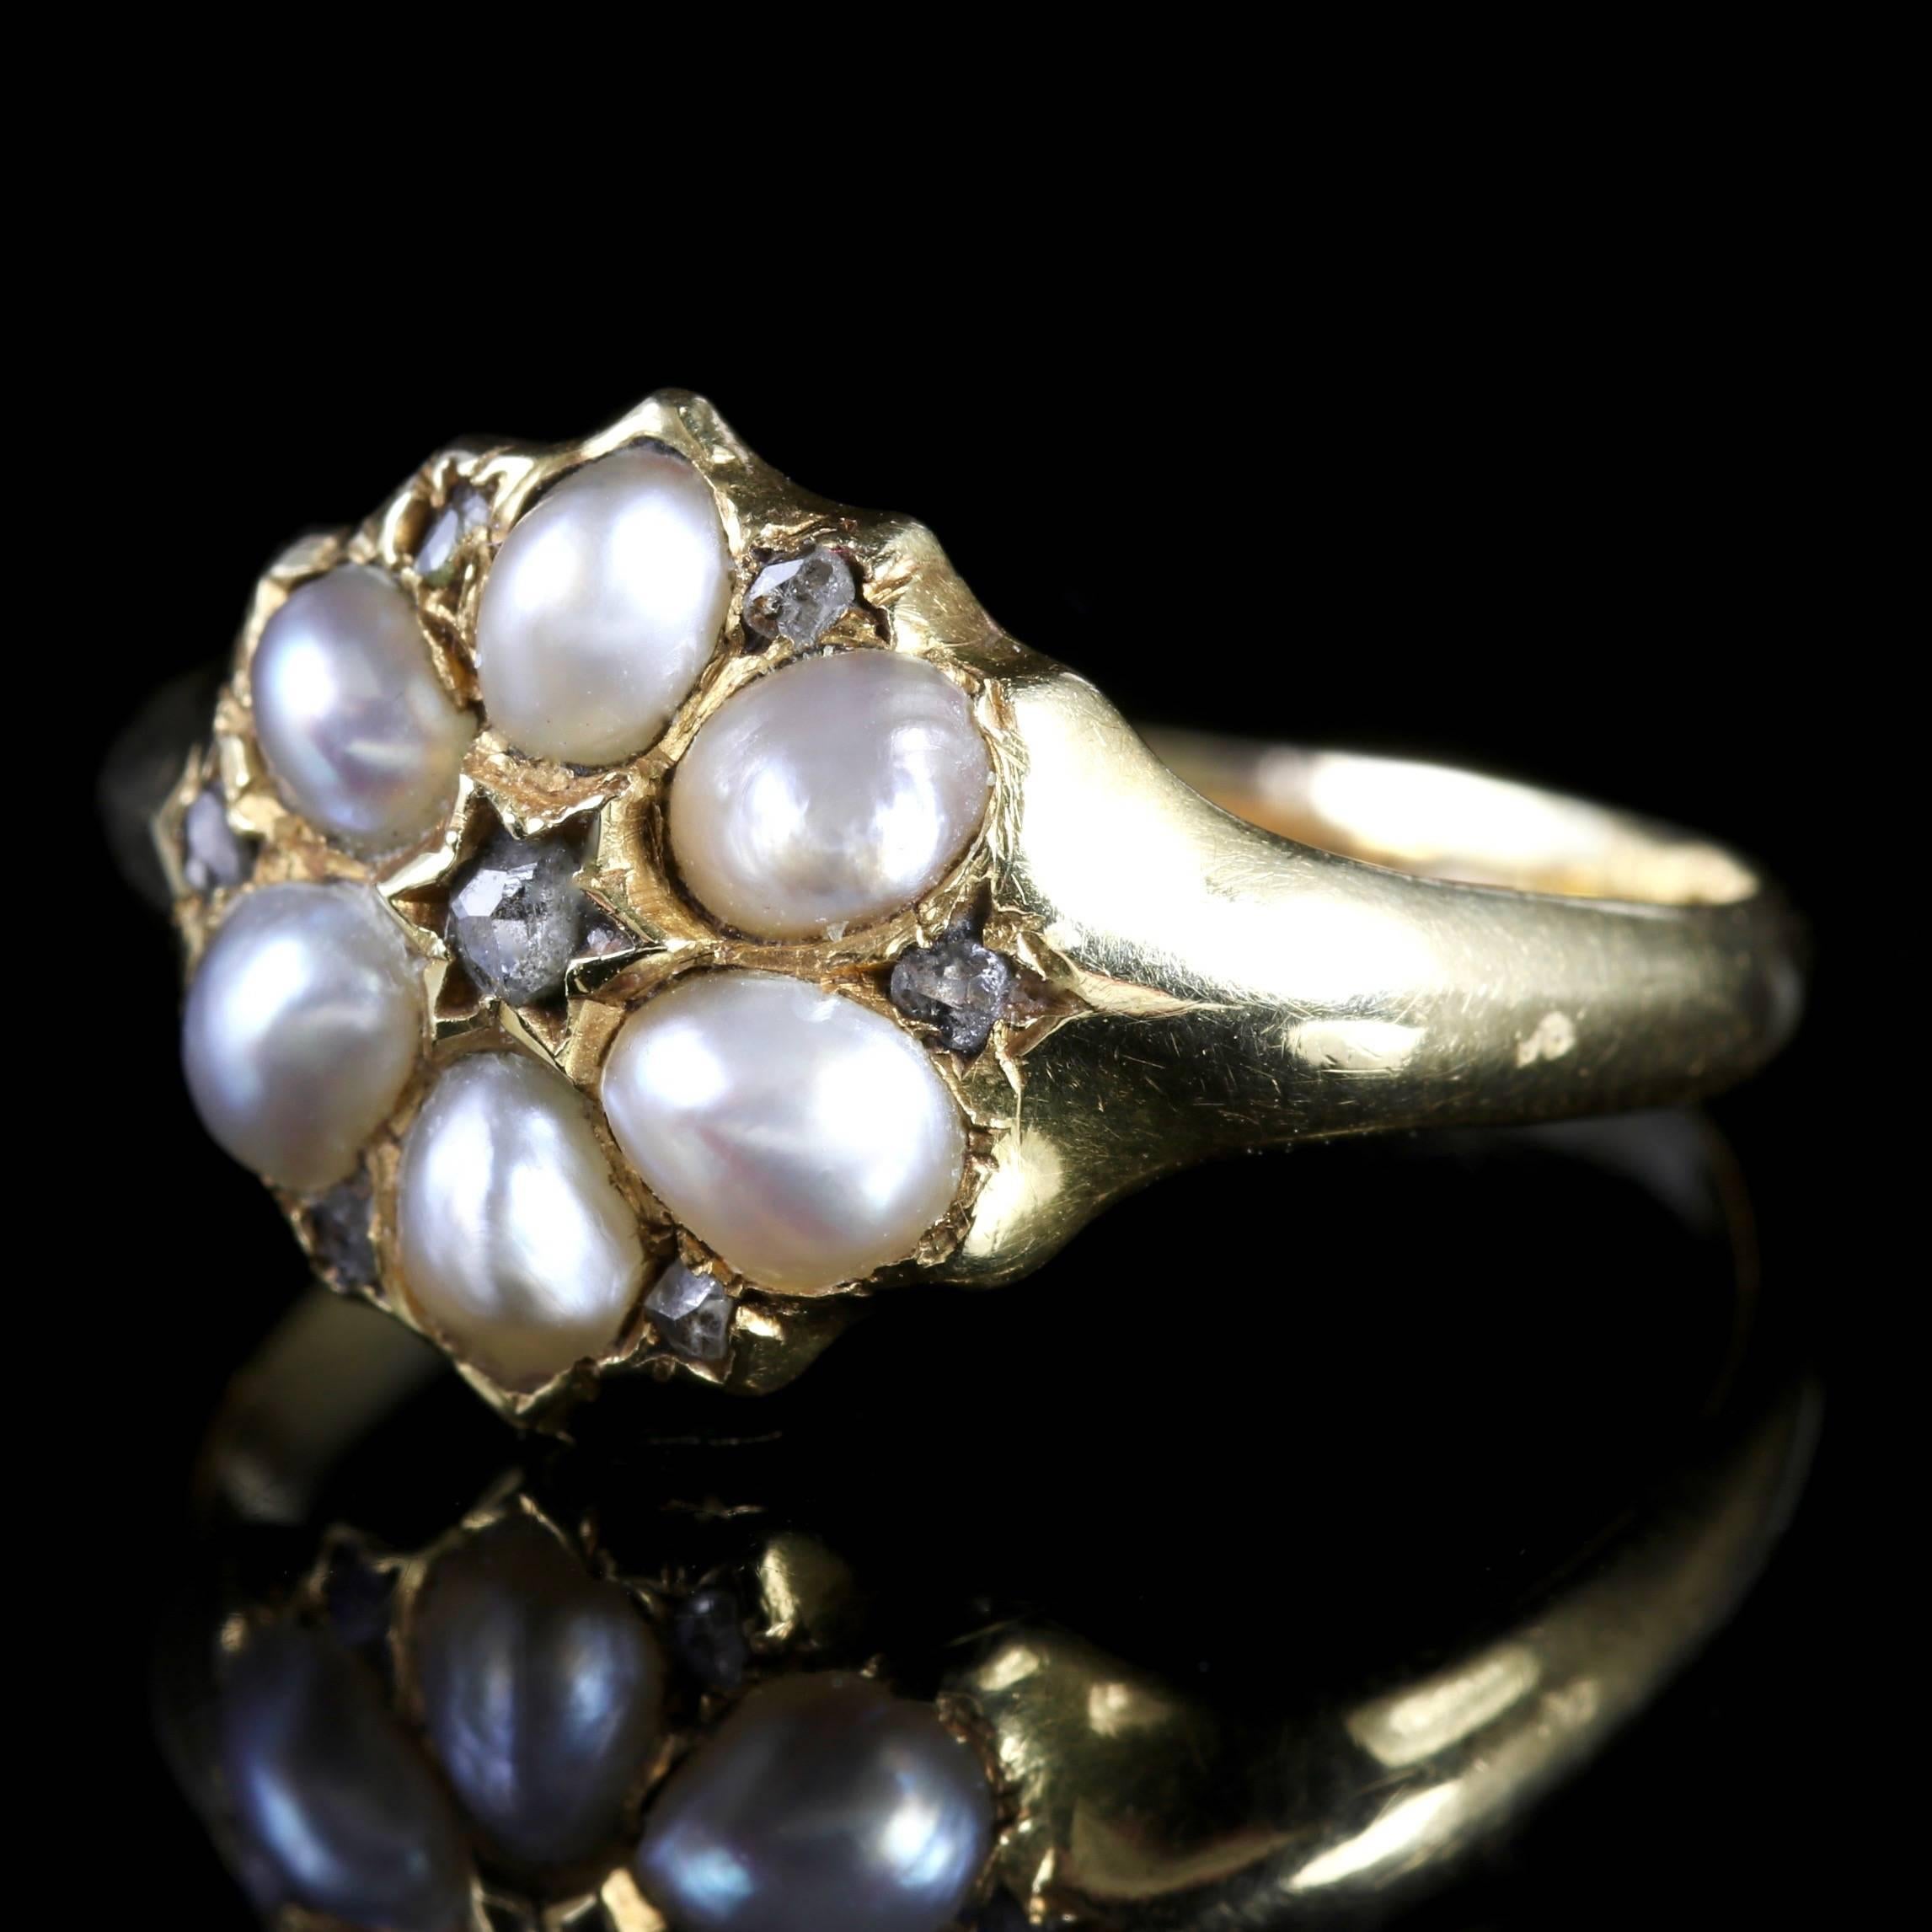 This fabulous Victorian star-set cluster ring is adorned with six lustrous natural pearls, six rose cut Diamonds which surrounds the Pearls, finishing with a rose cut Diamond in the centre, Circa 1900.

A rose cut Diamond resembles the shape of a